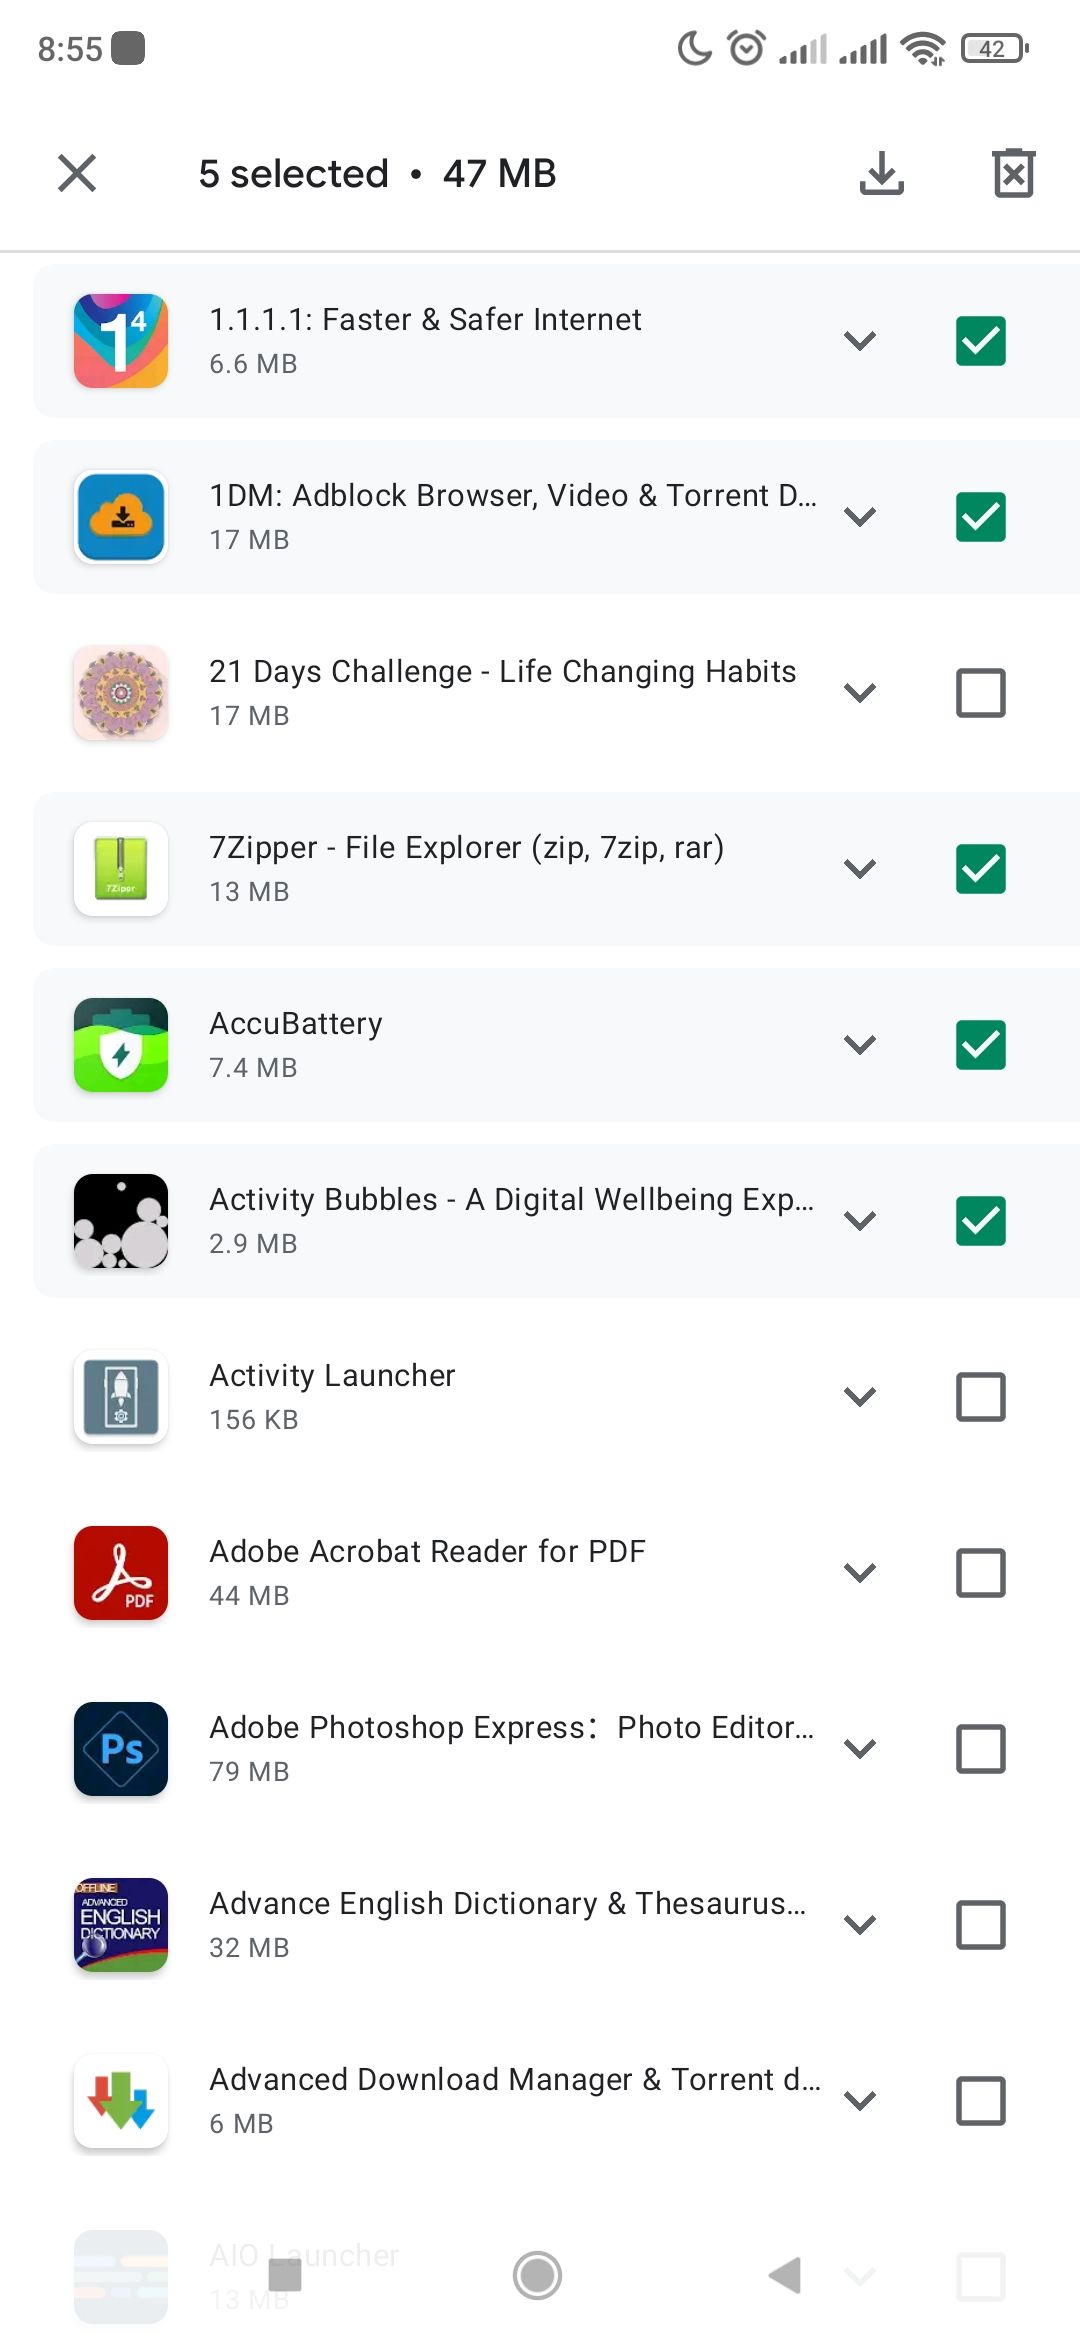 Selecting apps to delete from Google Play Store download history